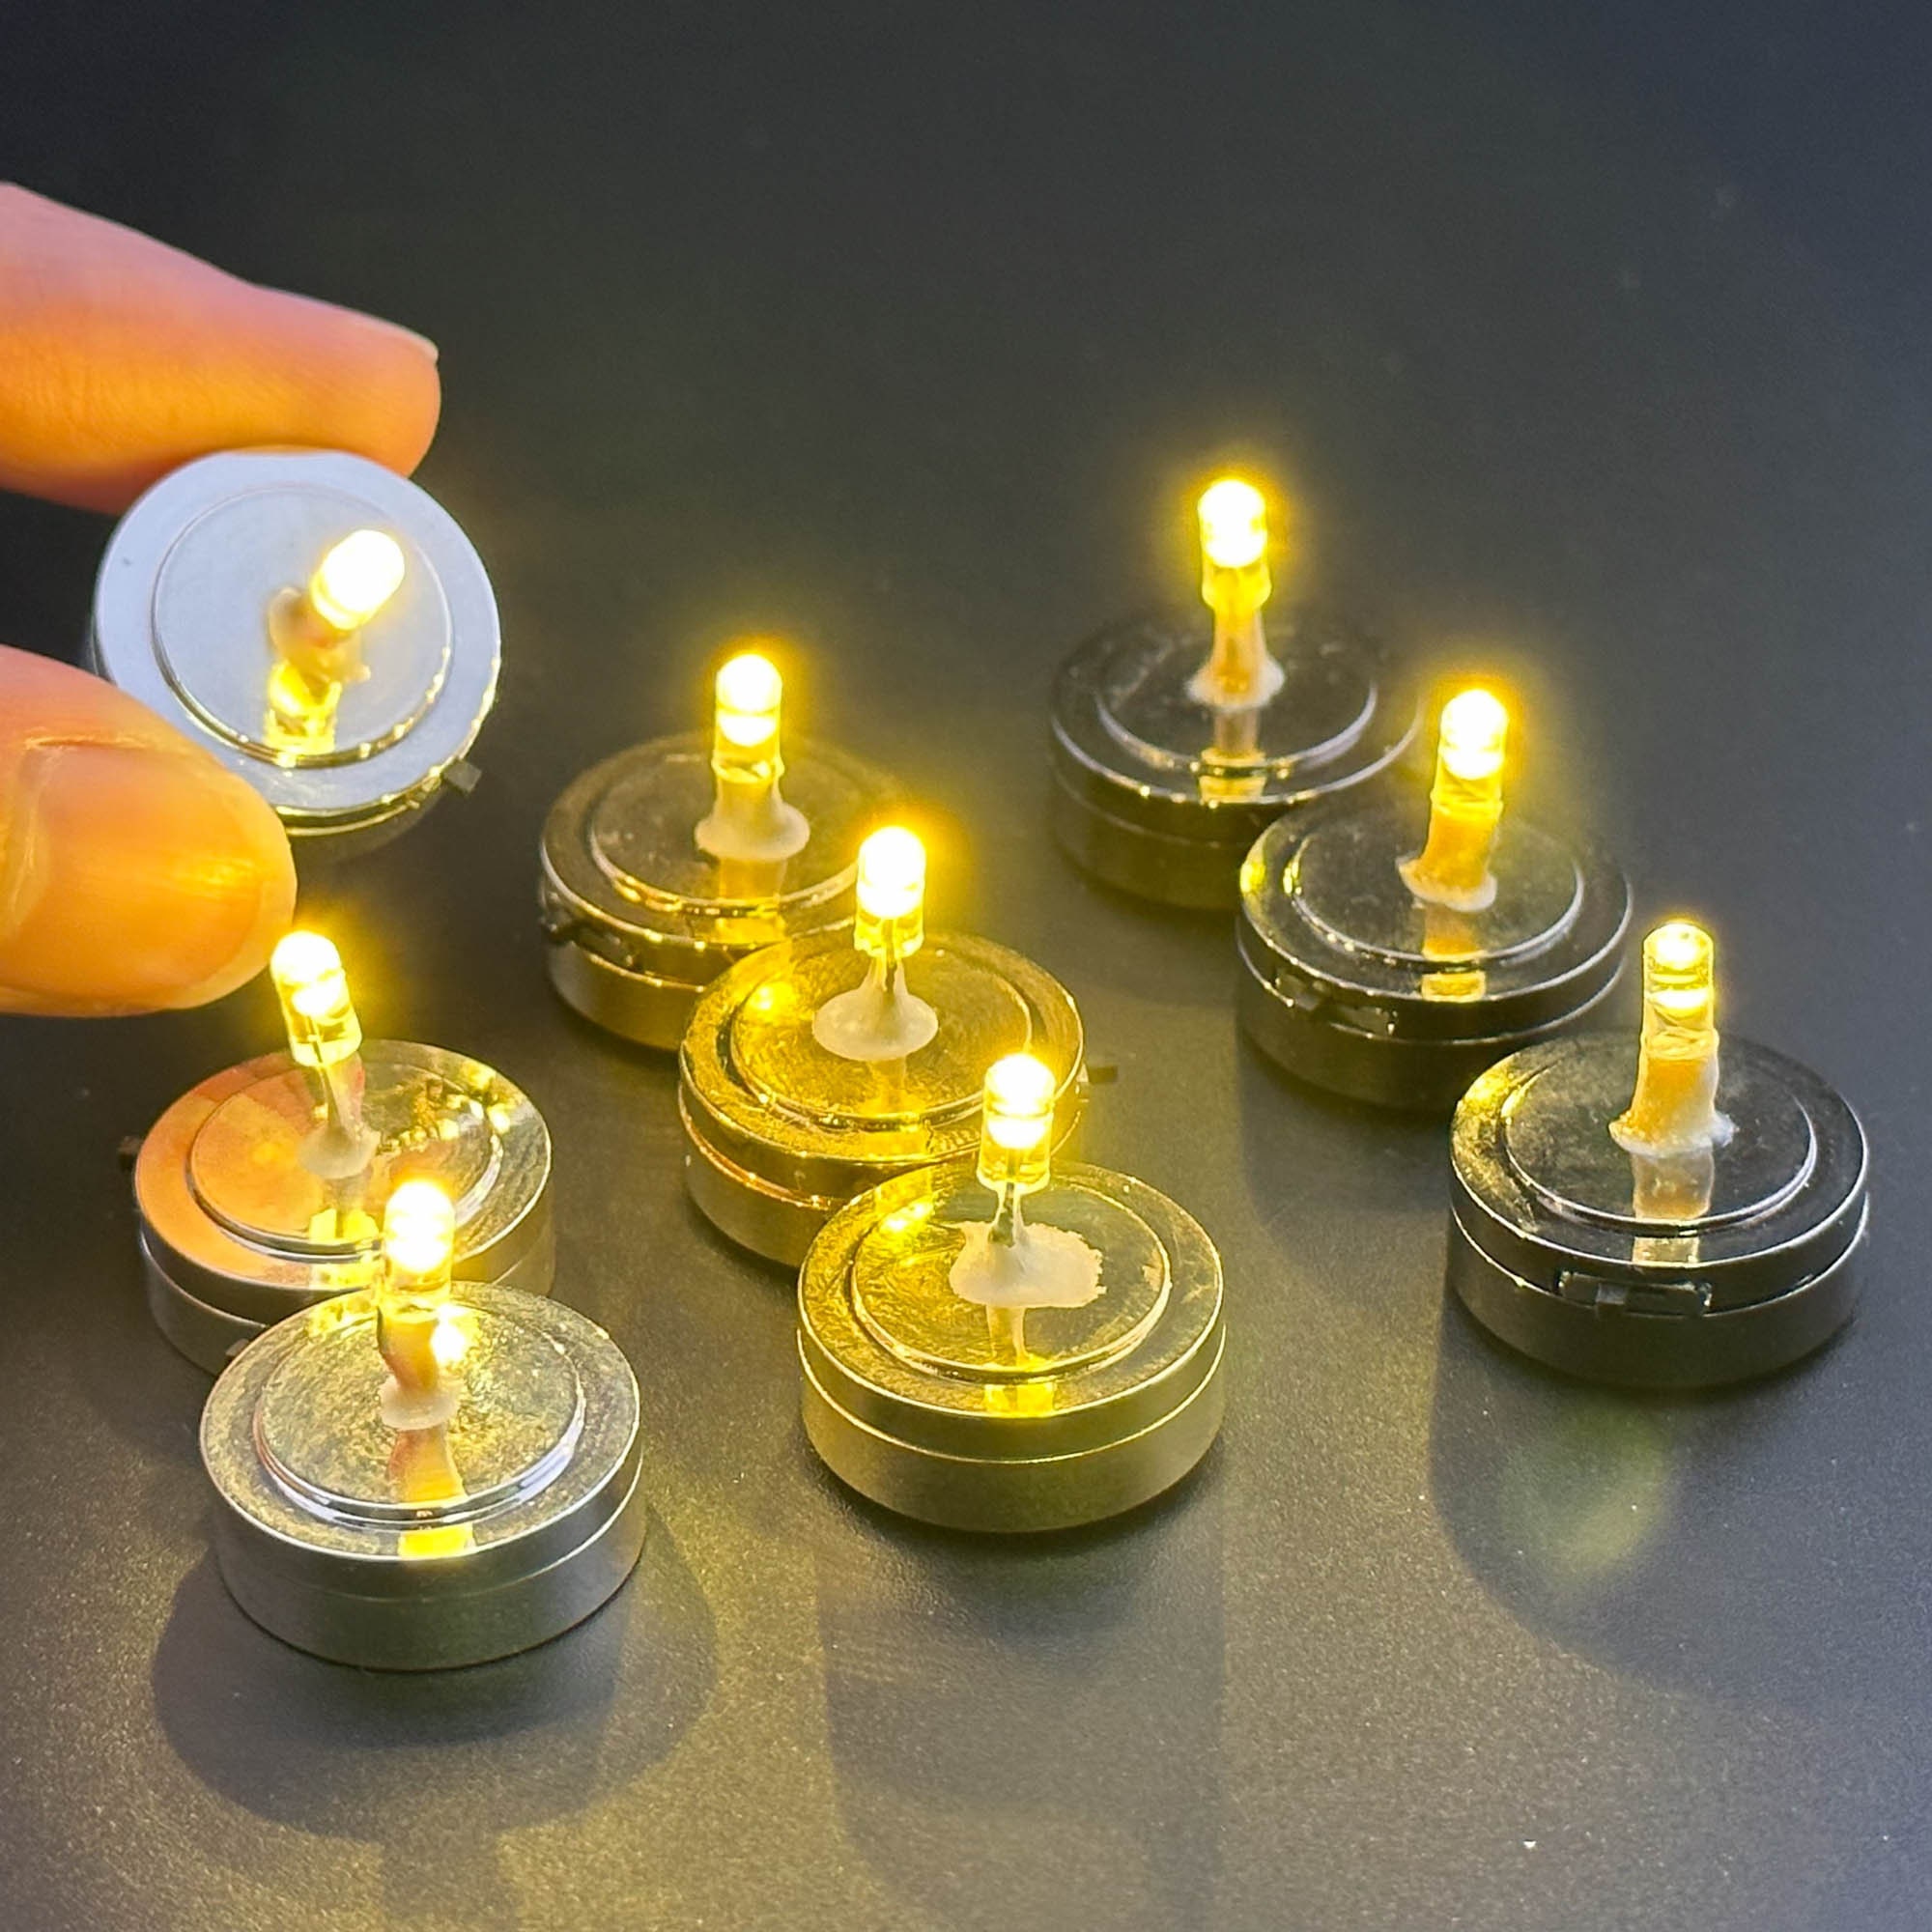 Miniature Spot Led Battery Light SILVER Lamp With On/off Switch